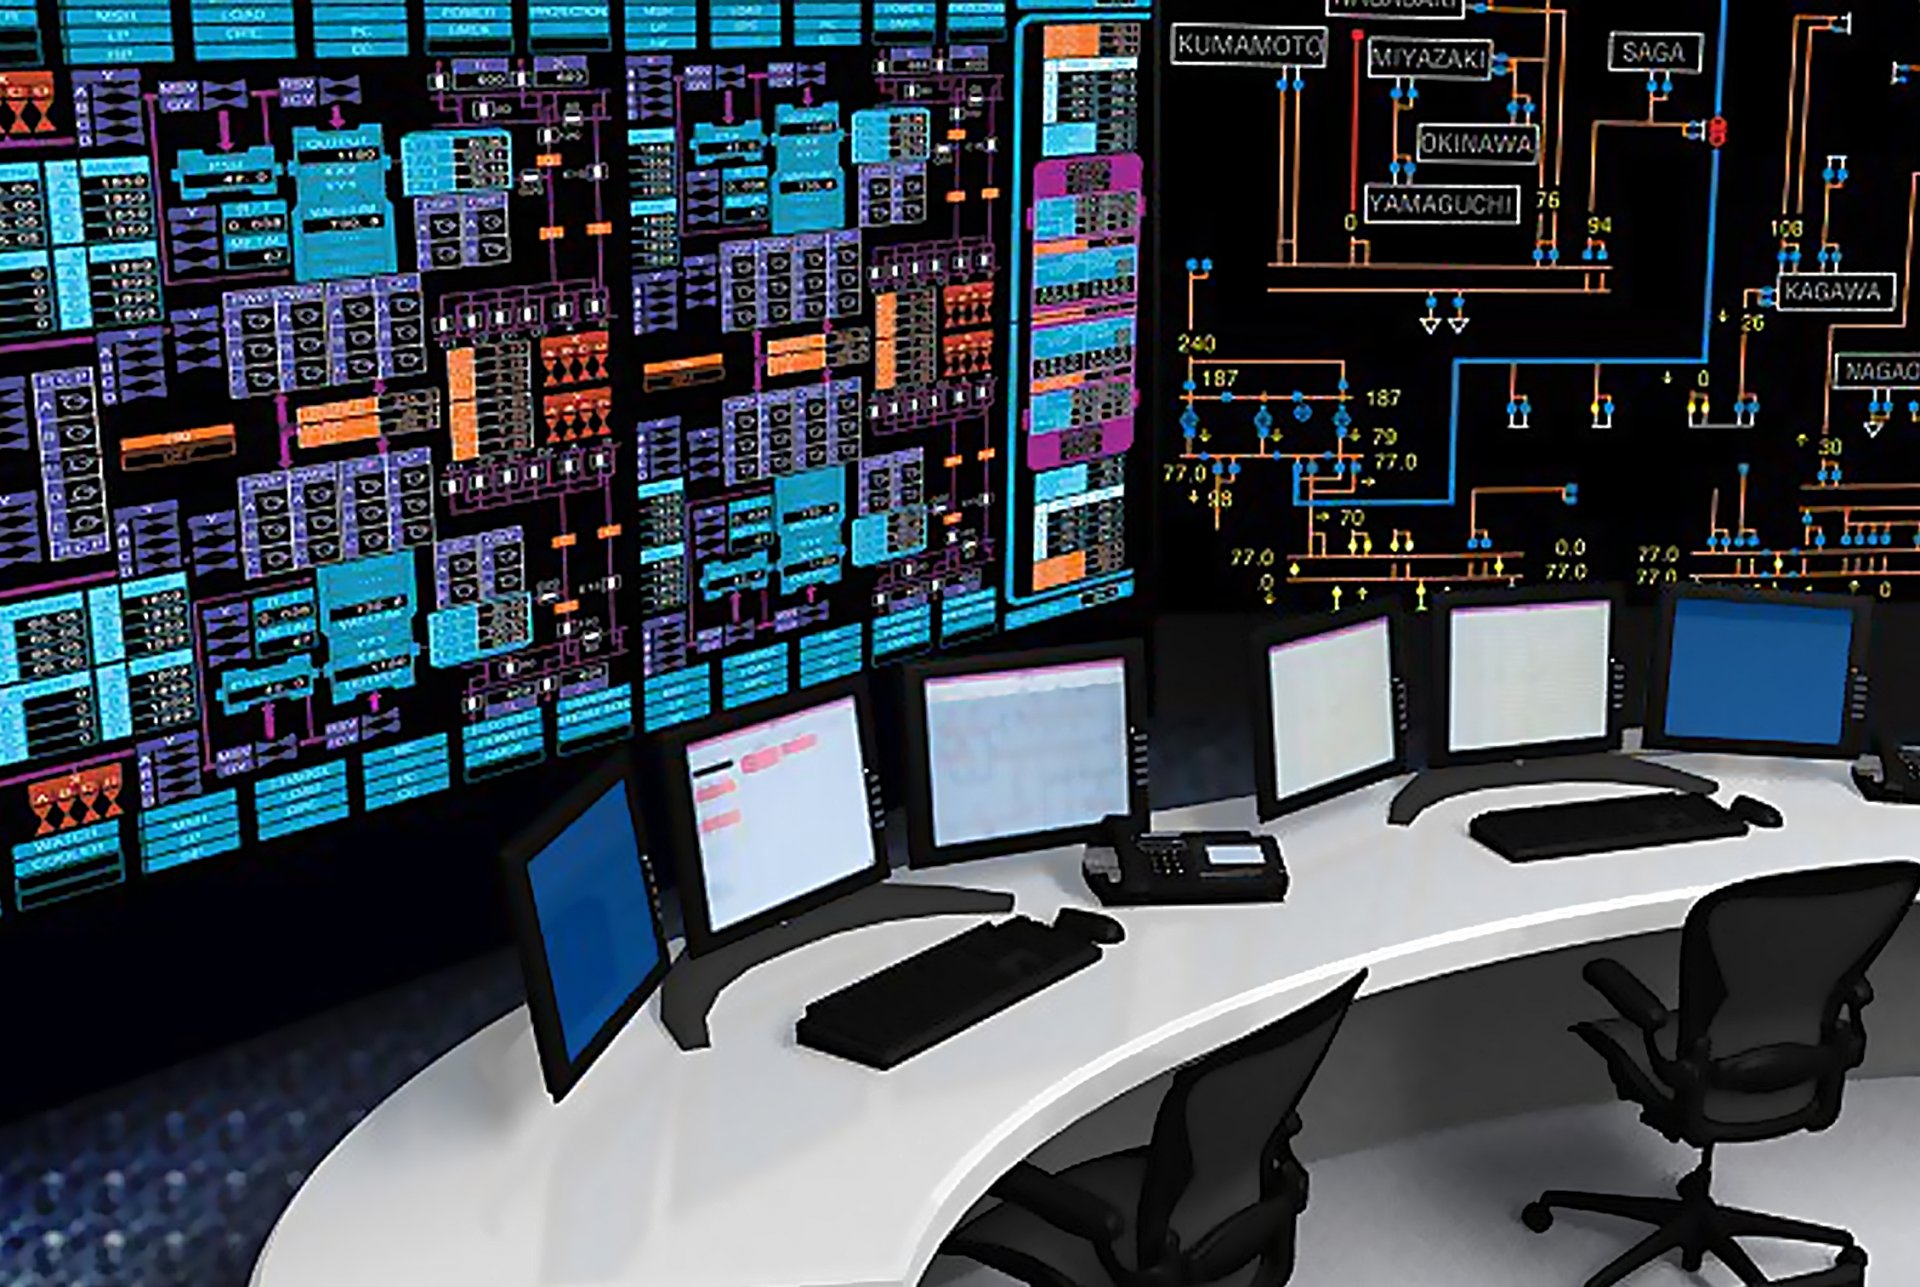 Relay protection, SCADA, Automation, and configuration and tuning